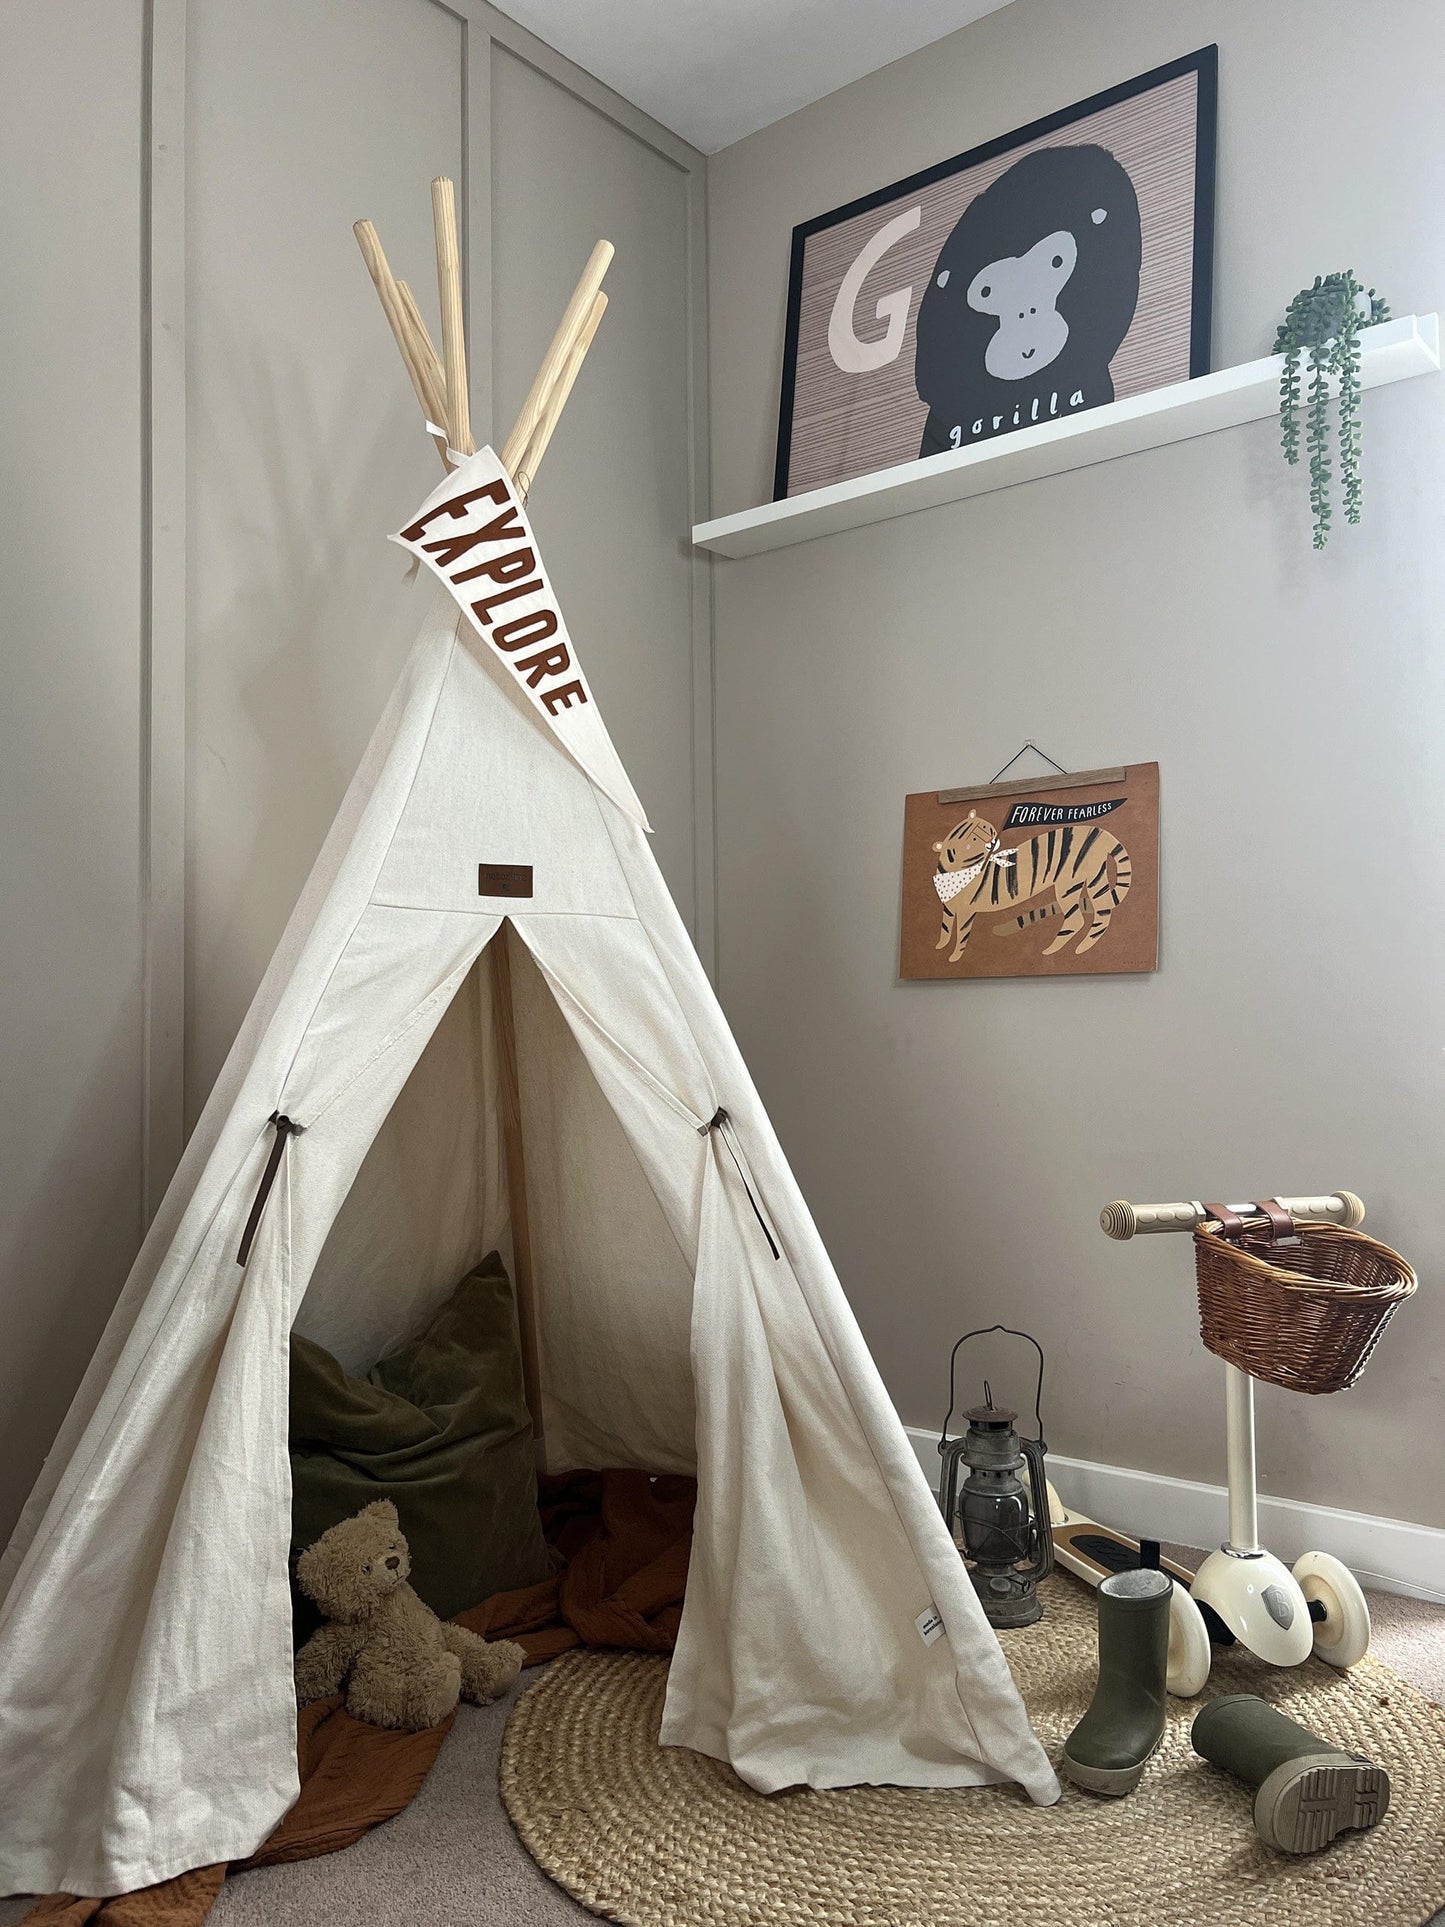 A cream Nobodinoz teepee, set up with blankets and cushions inside, with a cream triangle flag with EXPLORE in brown hanging from the top, with a black lantern, wellies, and a Banwood scooter next to it. On the wall, in an oak hanger is our forever fearless art print, and above that on a white shelf is our G is for gorilla art print and a hanging succulent.